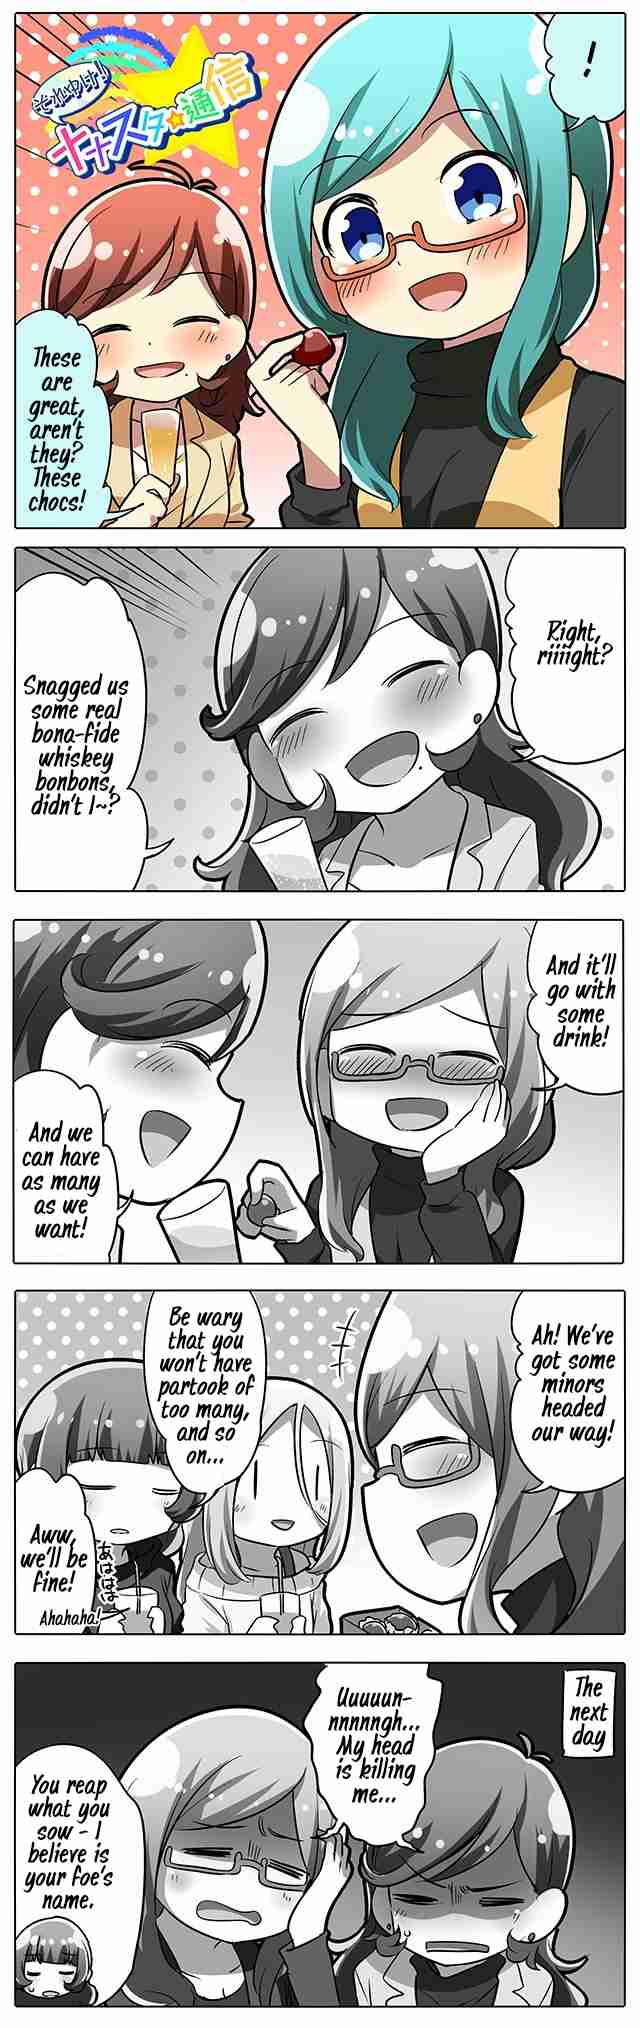 Let's Go! Nanastar Comms Ch. 238 This, Too, is Valentine's